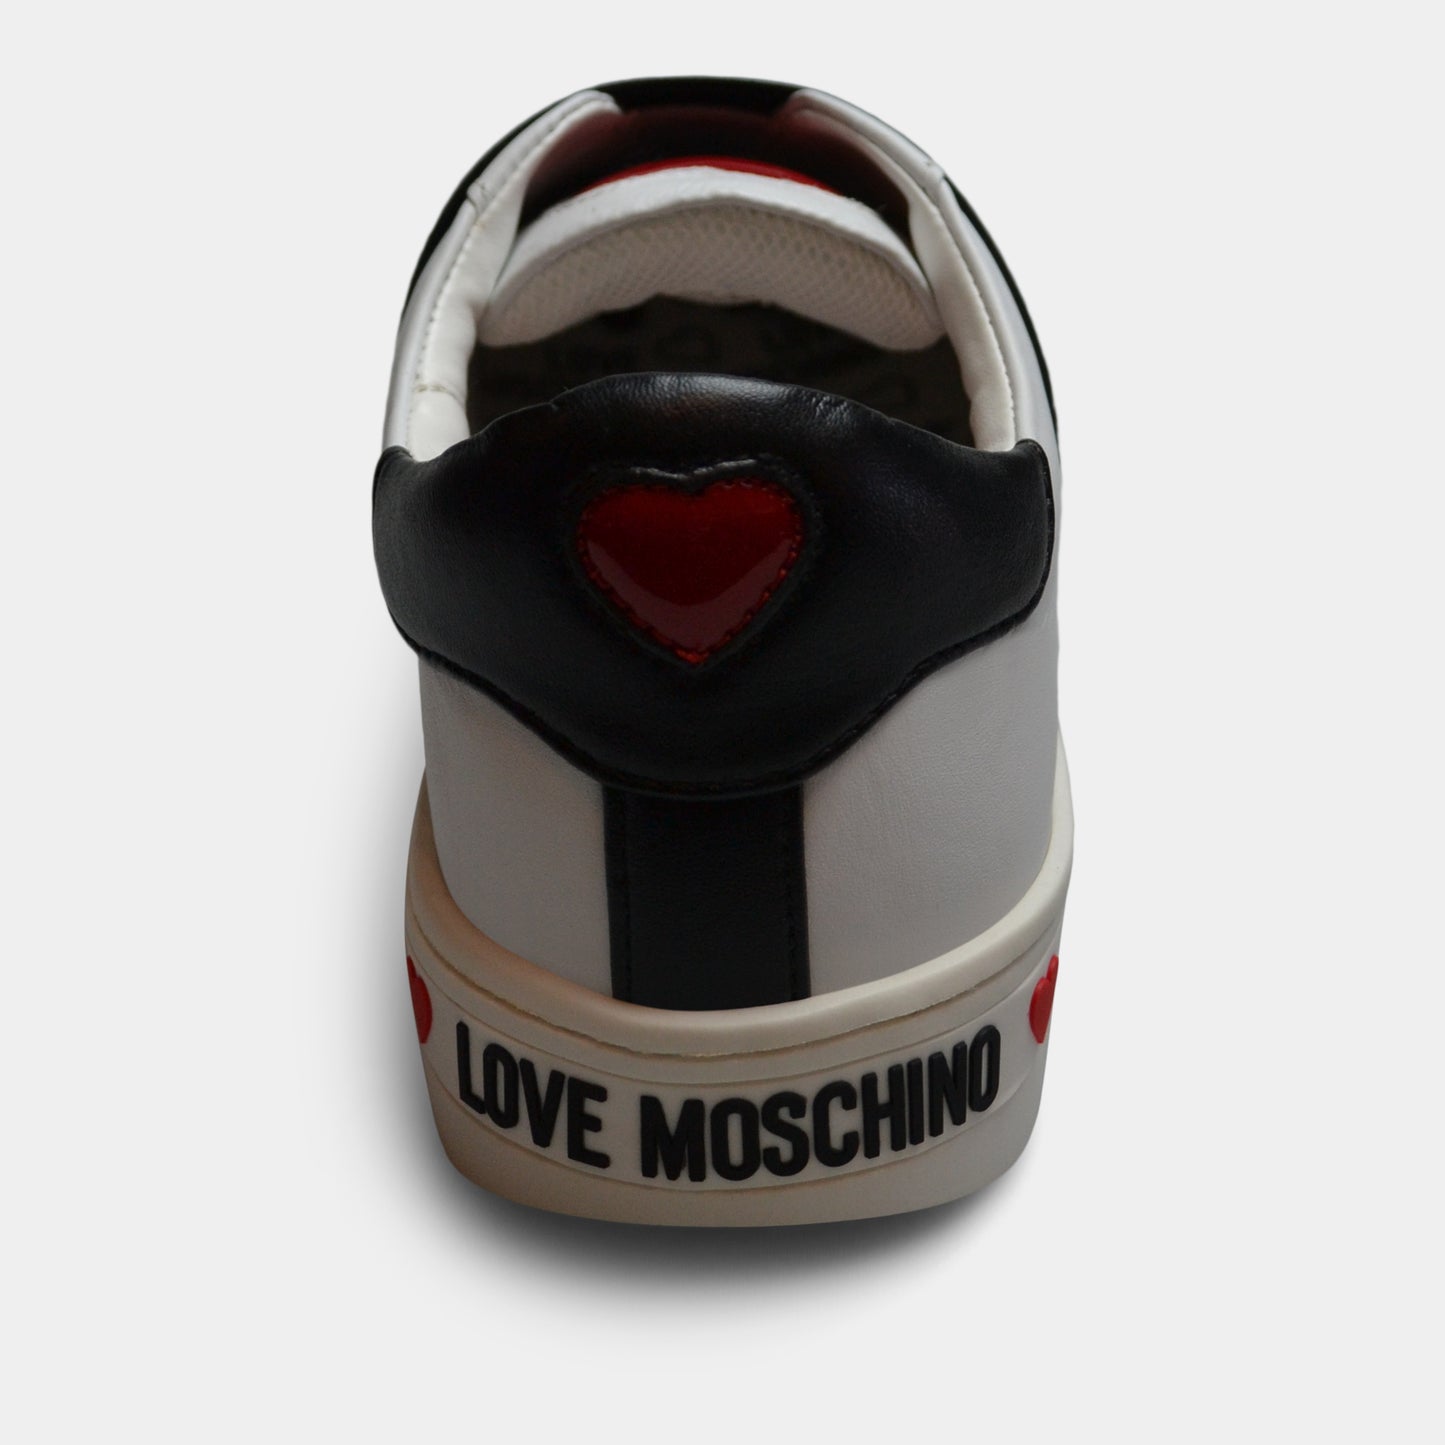 LOVE MOSCHINO SNEAKER IN WHITE WITH BLACK DETAIL